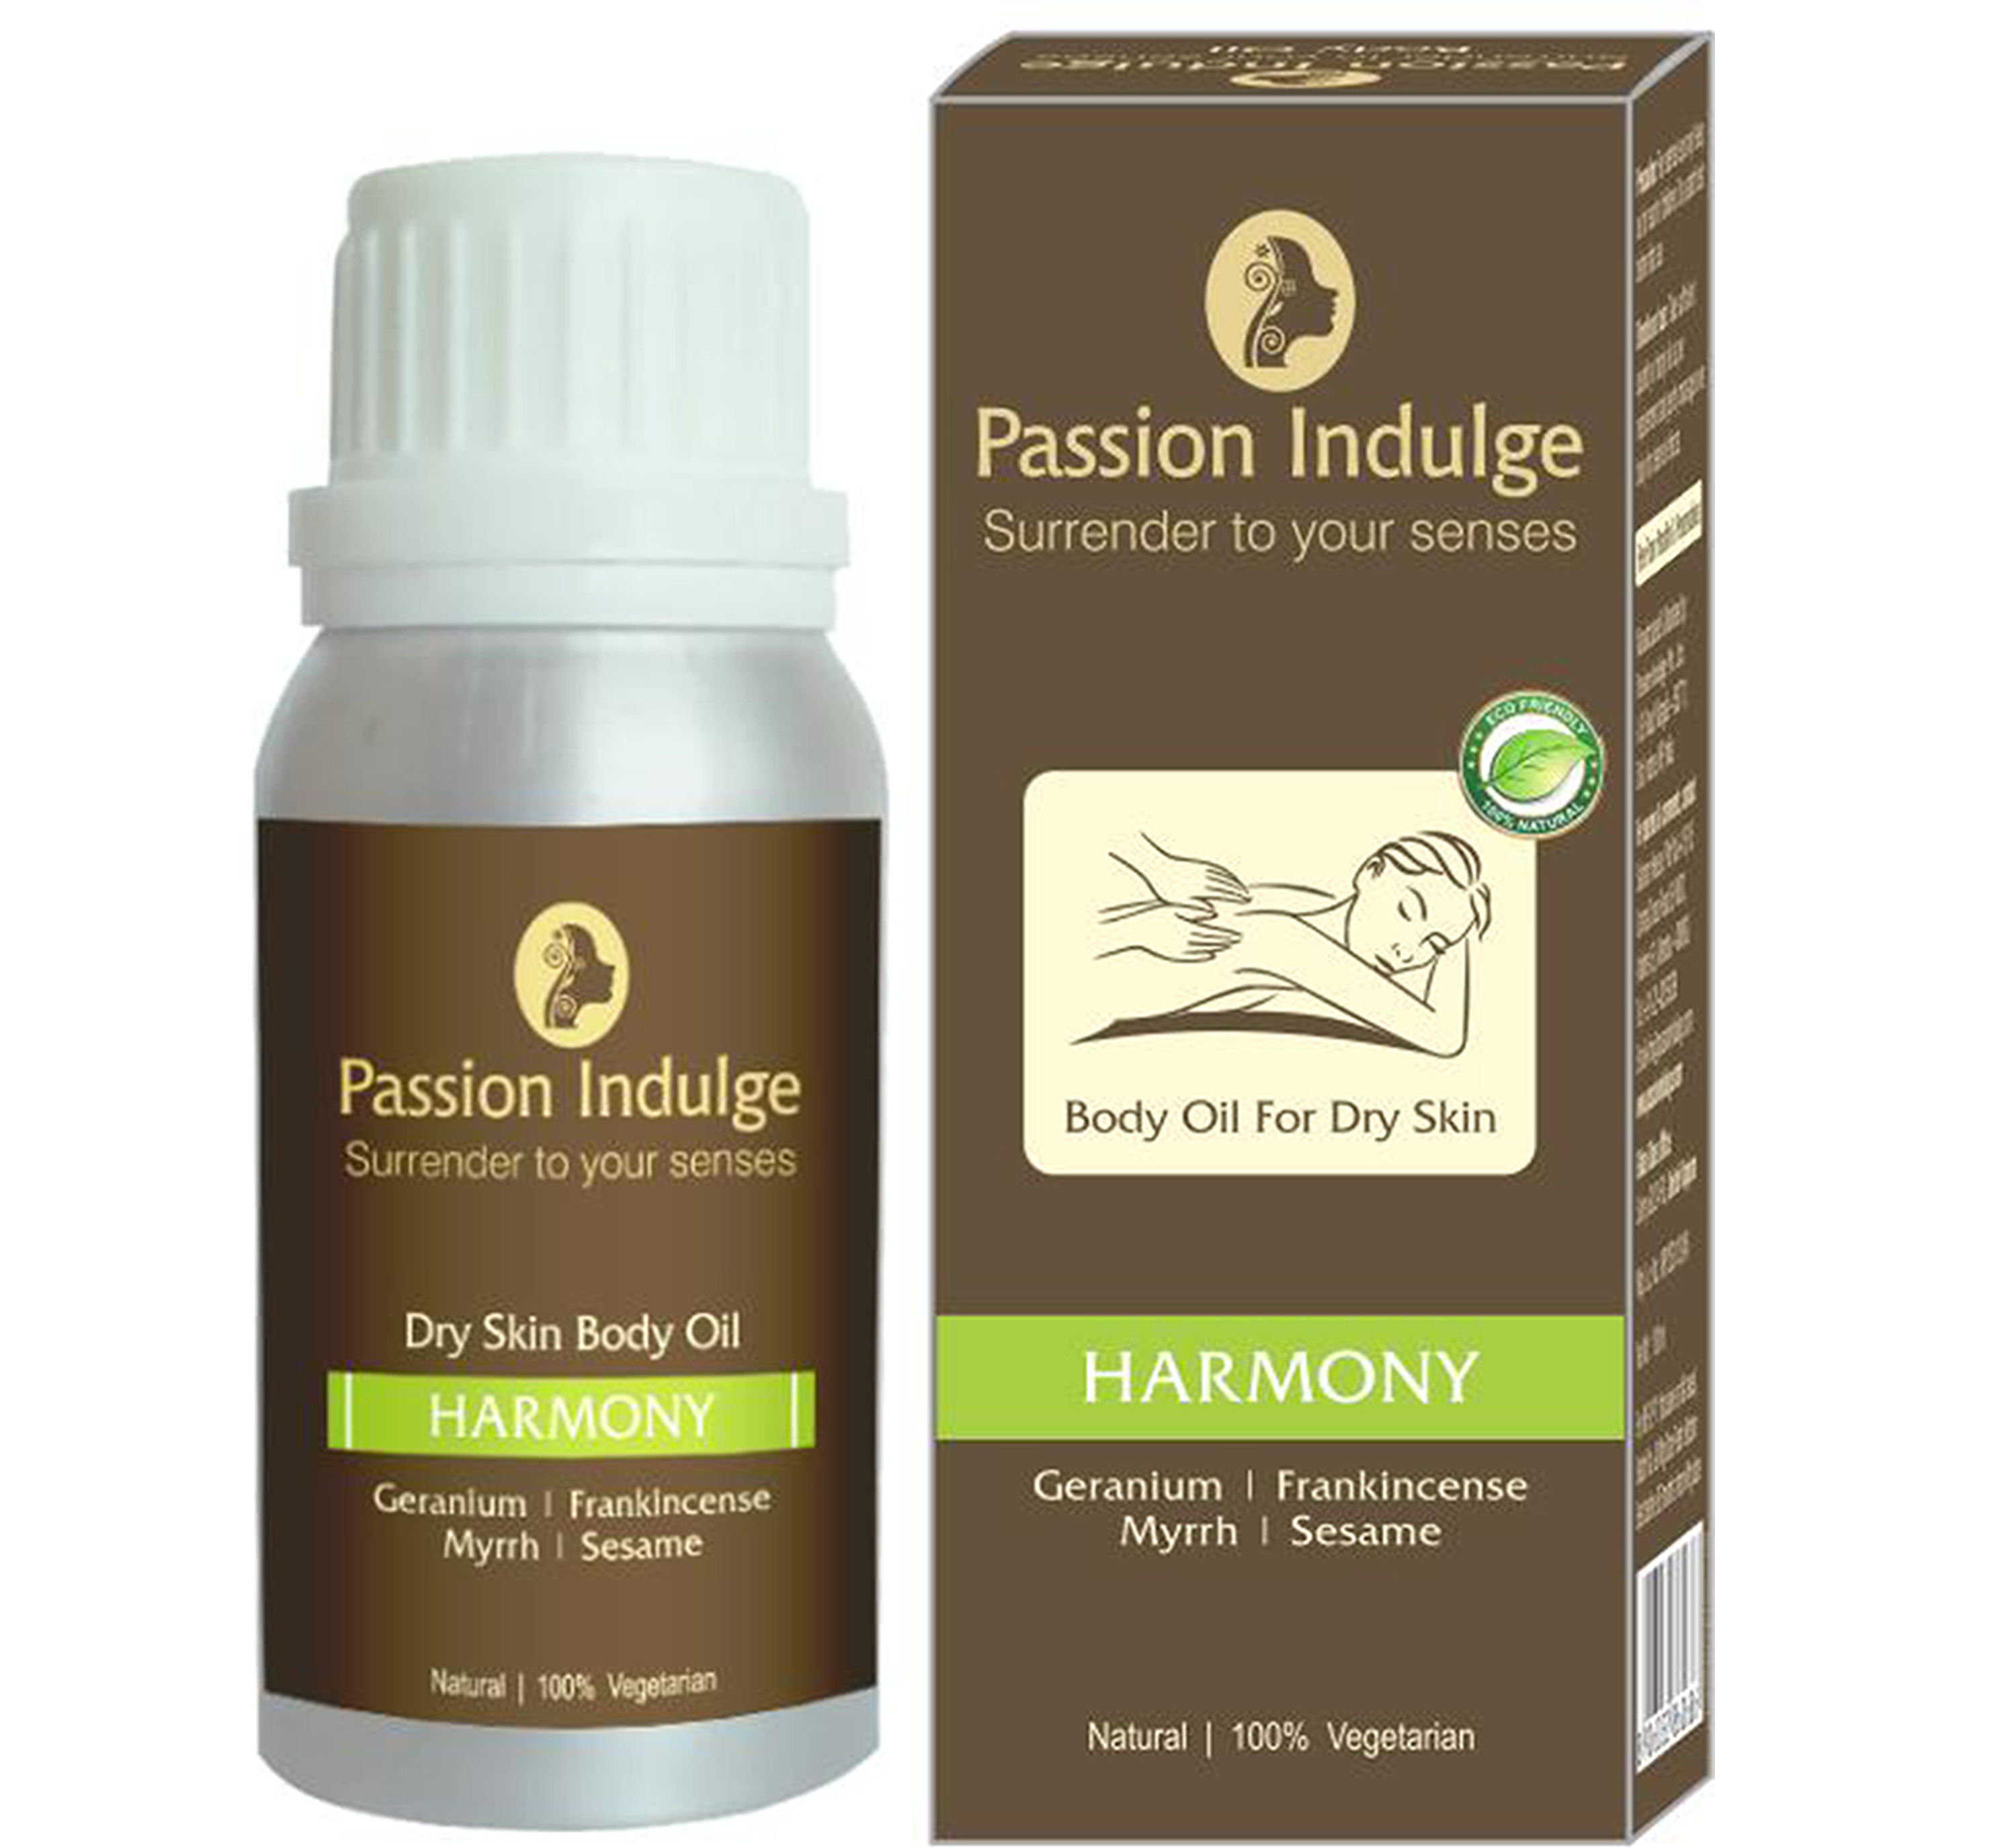 Passion Indulge Harmony Massage Oil For Dry Skin